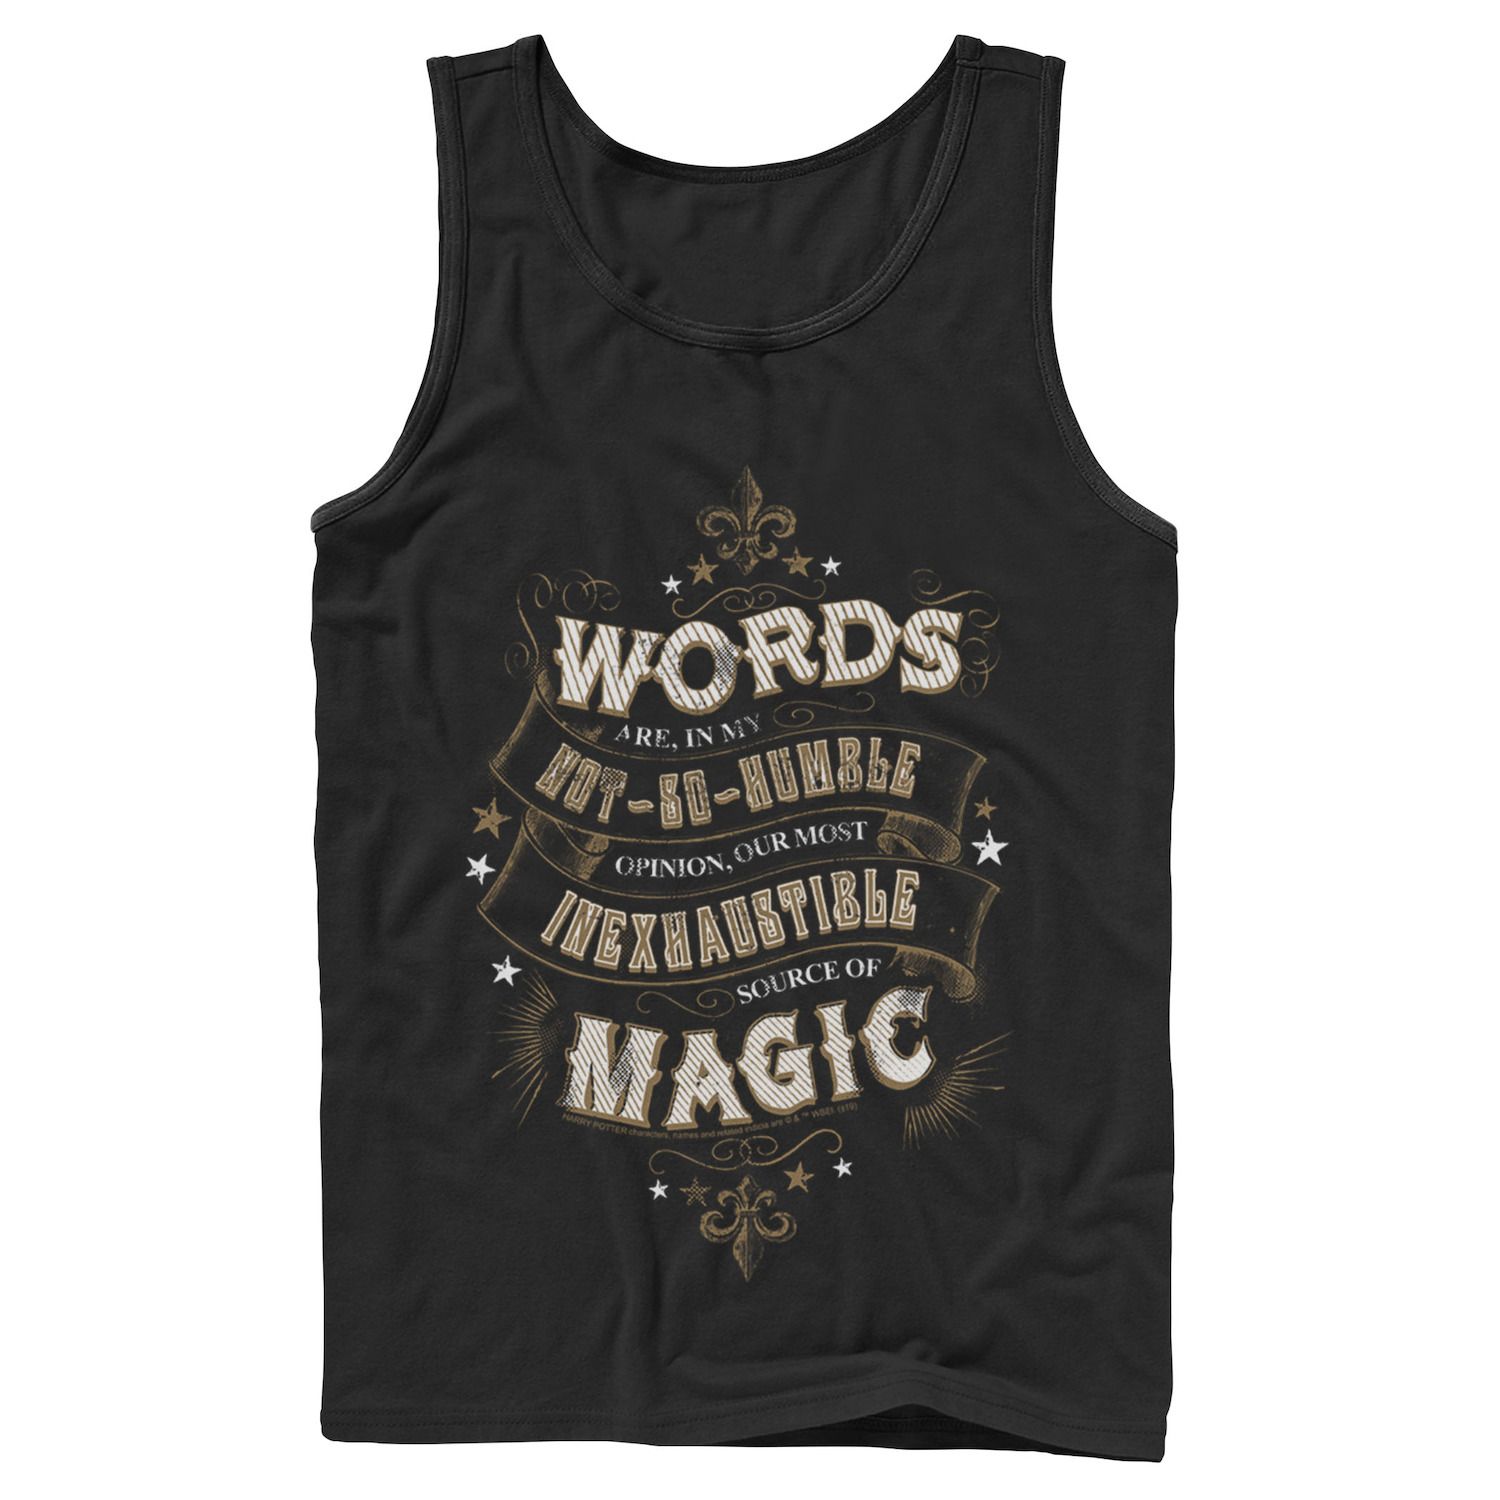 Image for Harry Potter Men's "Inexhaustible Source of Magic" Tank at Kohl's.